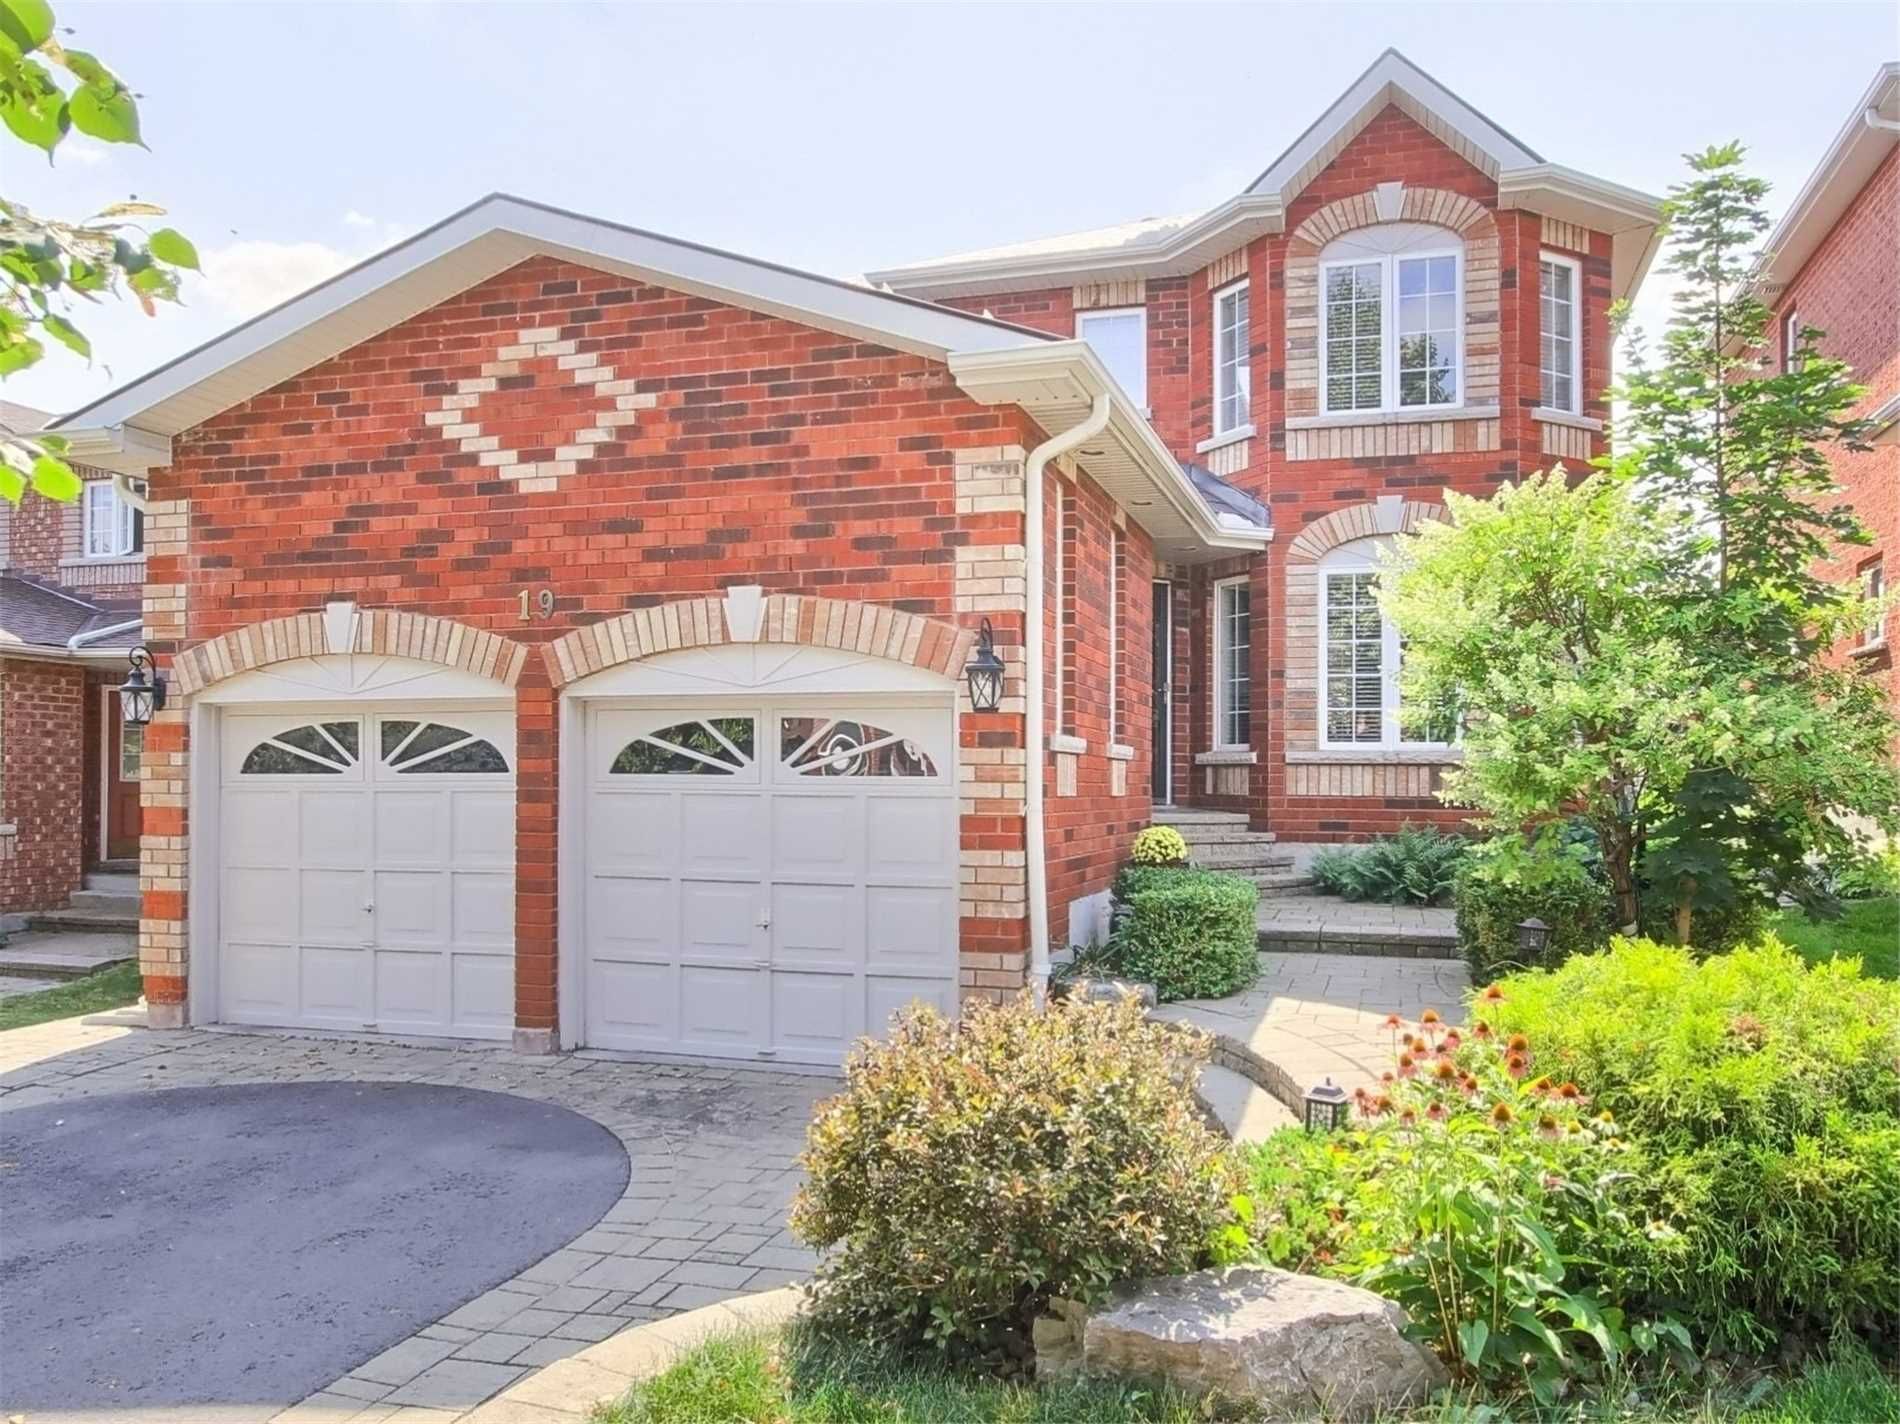 I have sold a property at 19 Prince DR in Bradford West Gwillimbury
